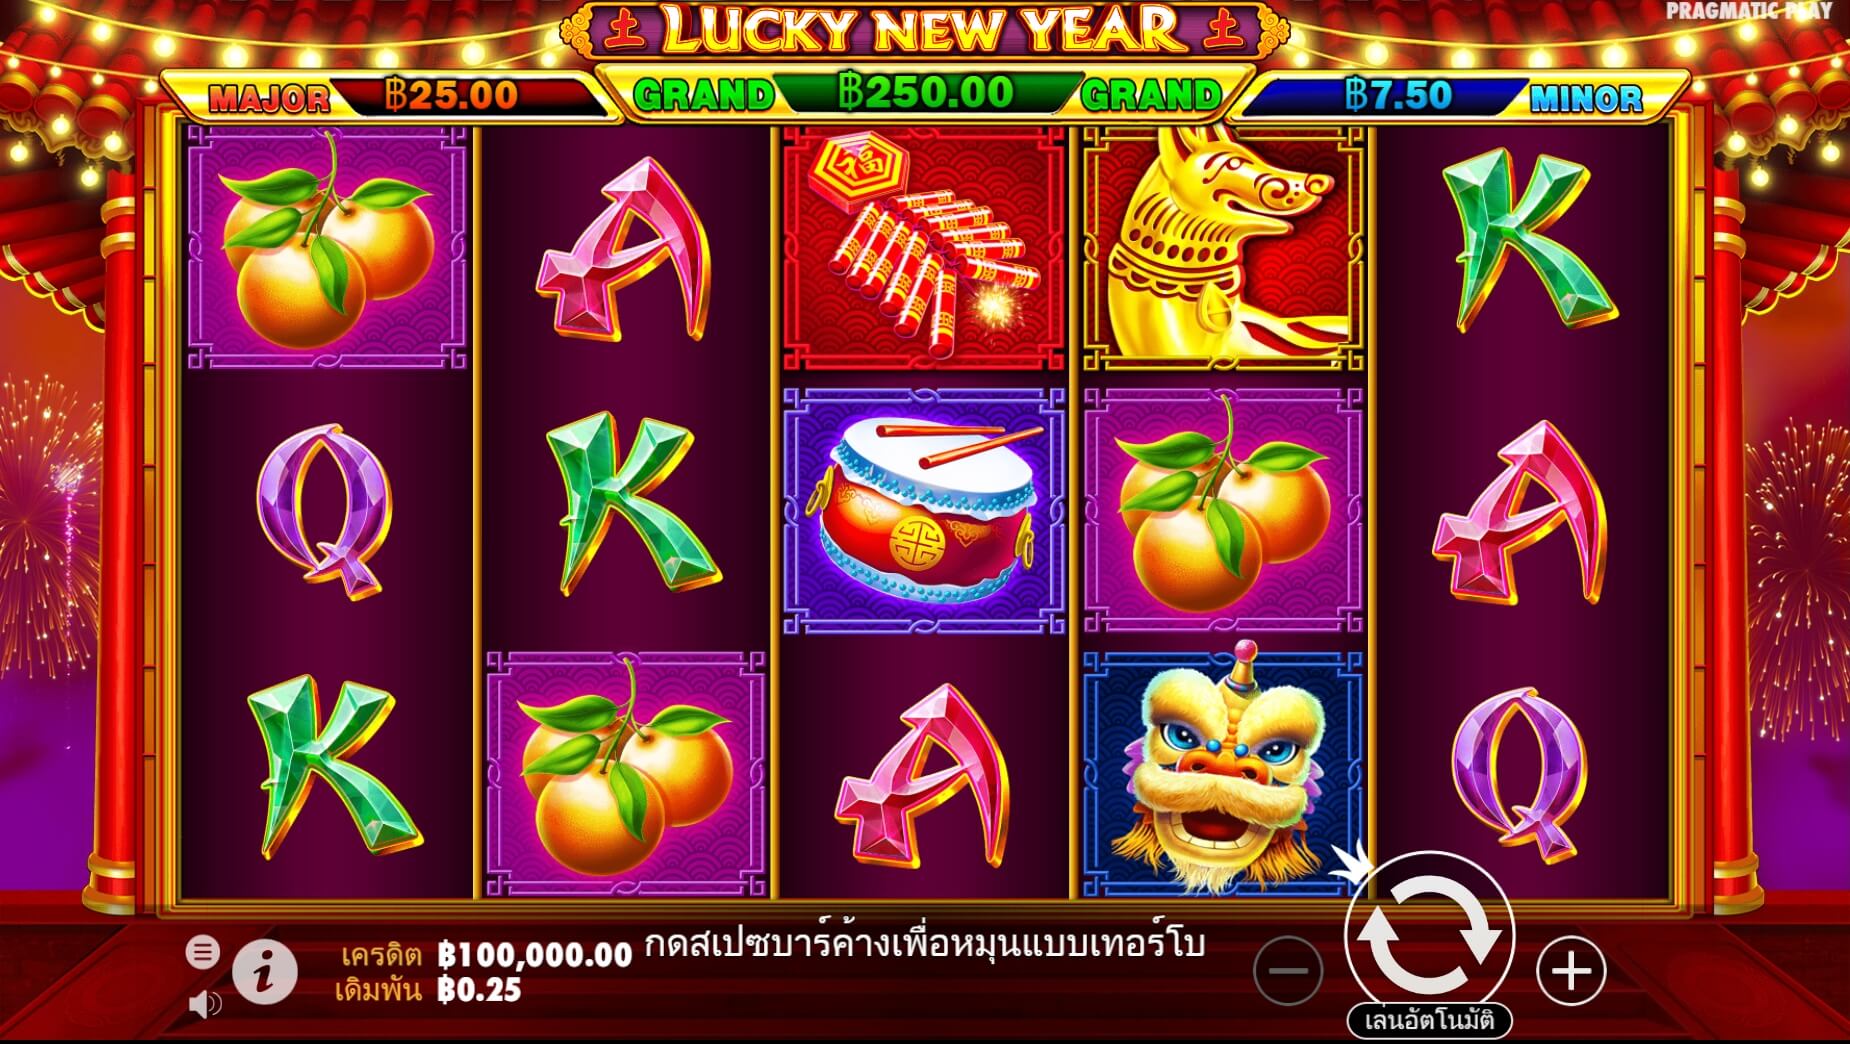 Lucky New Year ฟรีเครดิต Caishen’s Gold เครดิตฟรี 300